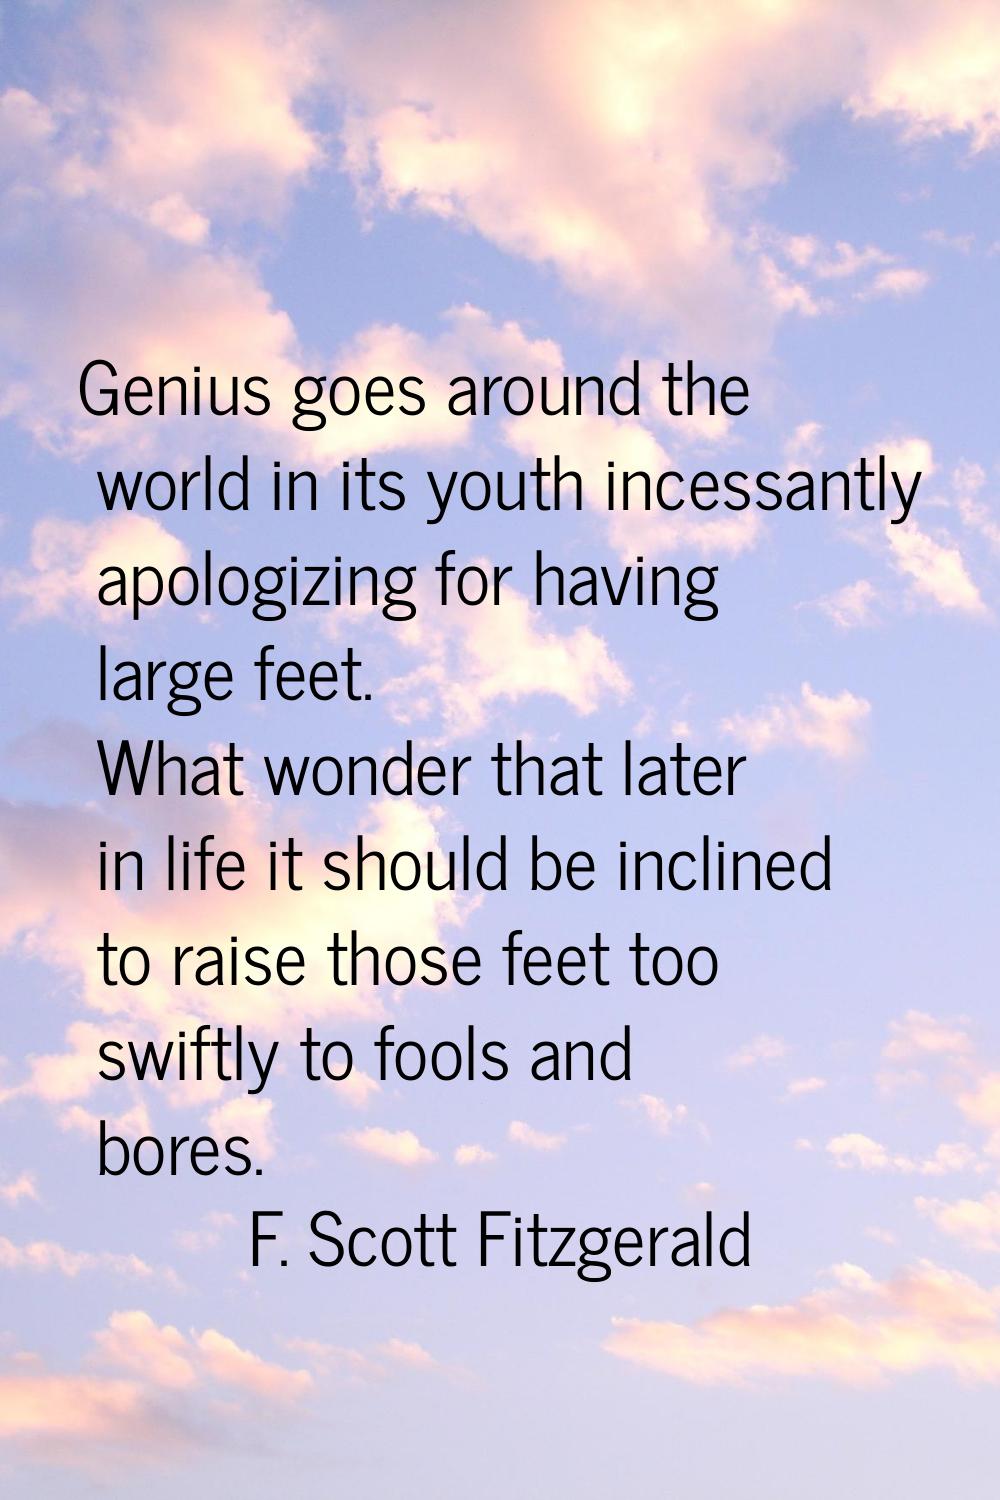 Genius goes around the world in its youth incessantly apologizing for having large feet. What wonde